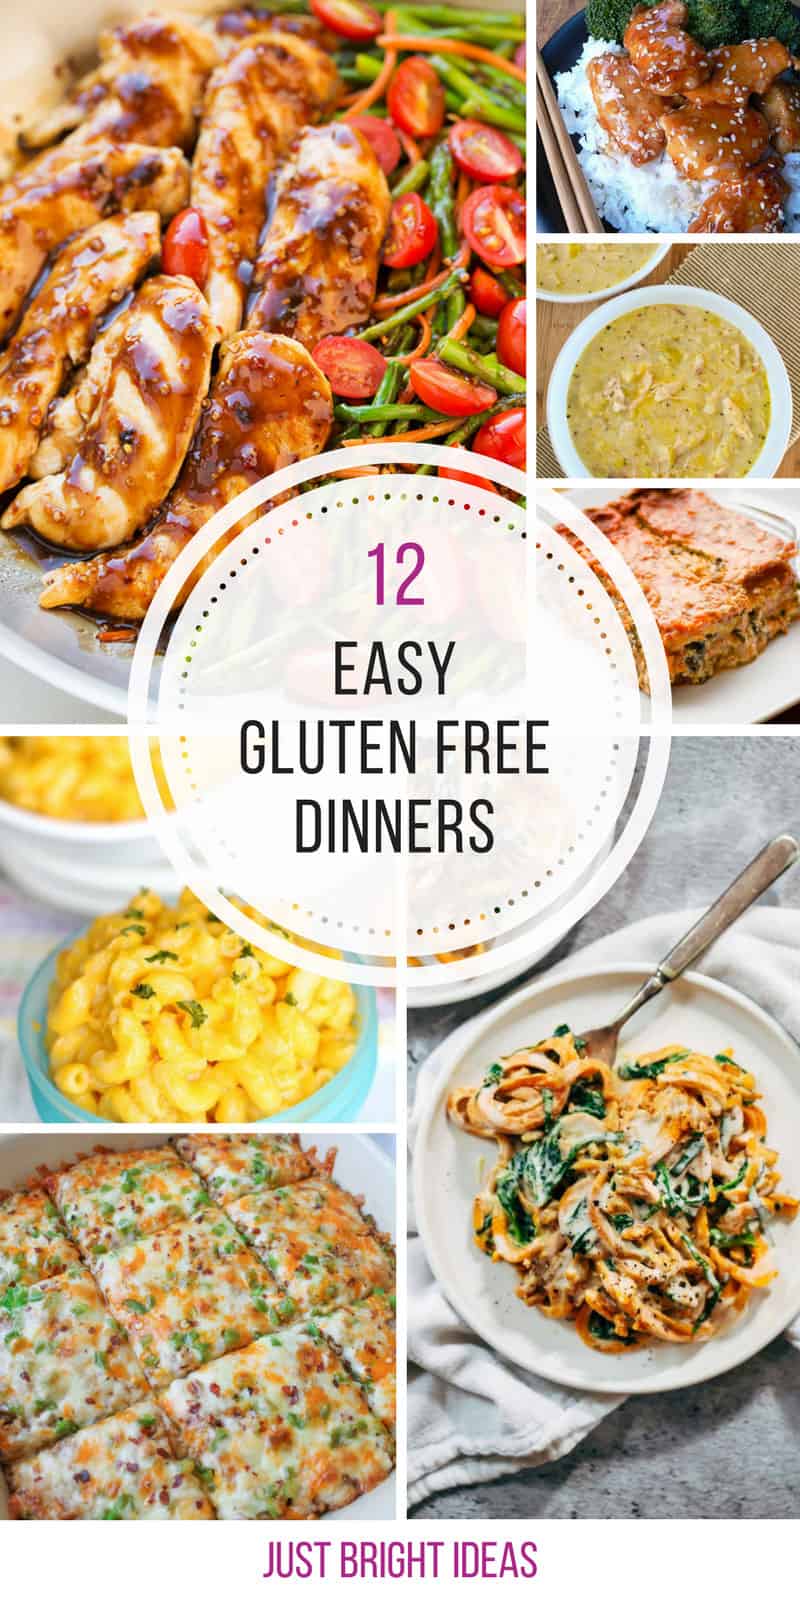 These GF dinner recipes are so tasty! Thanks for sharing!